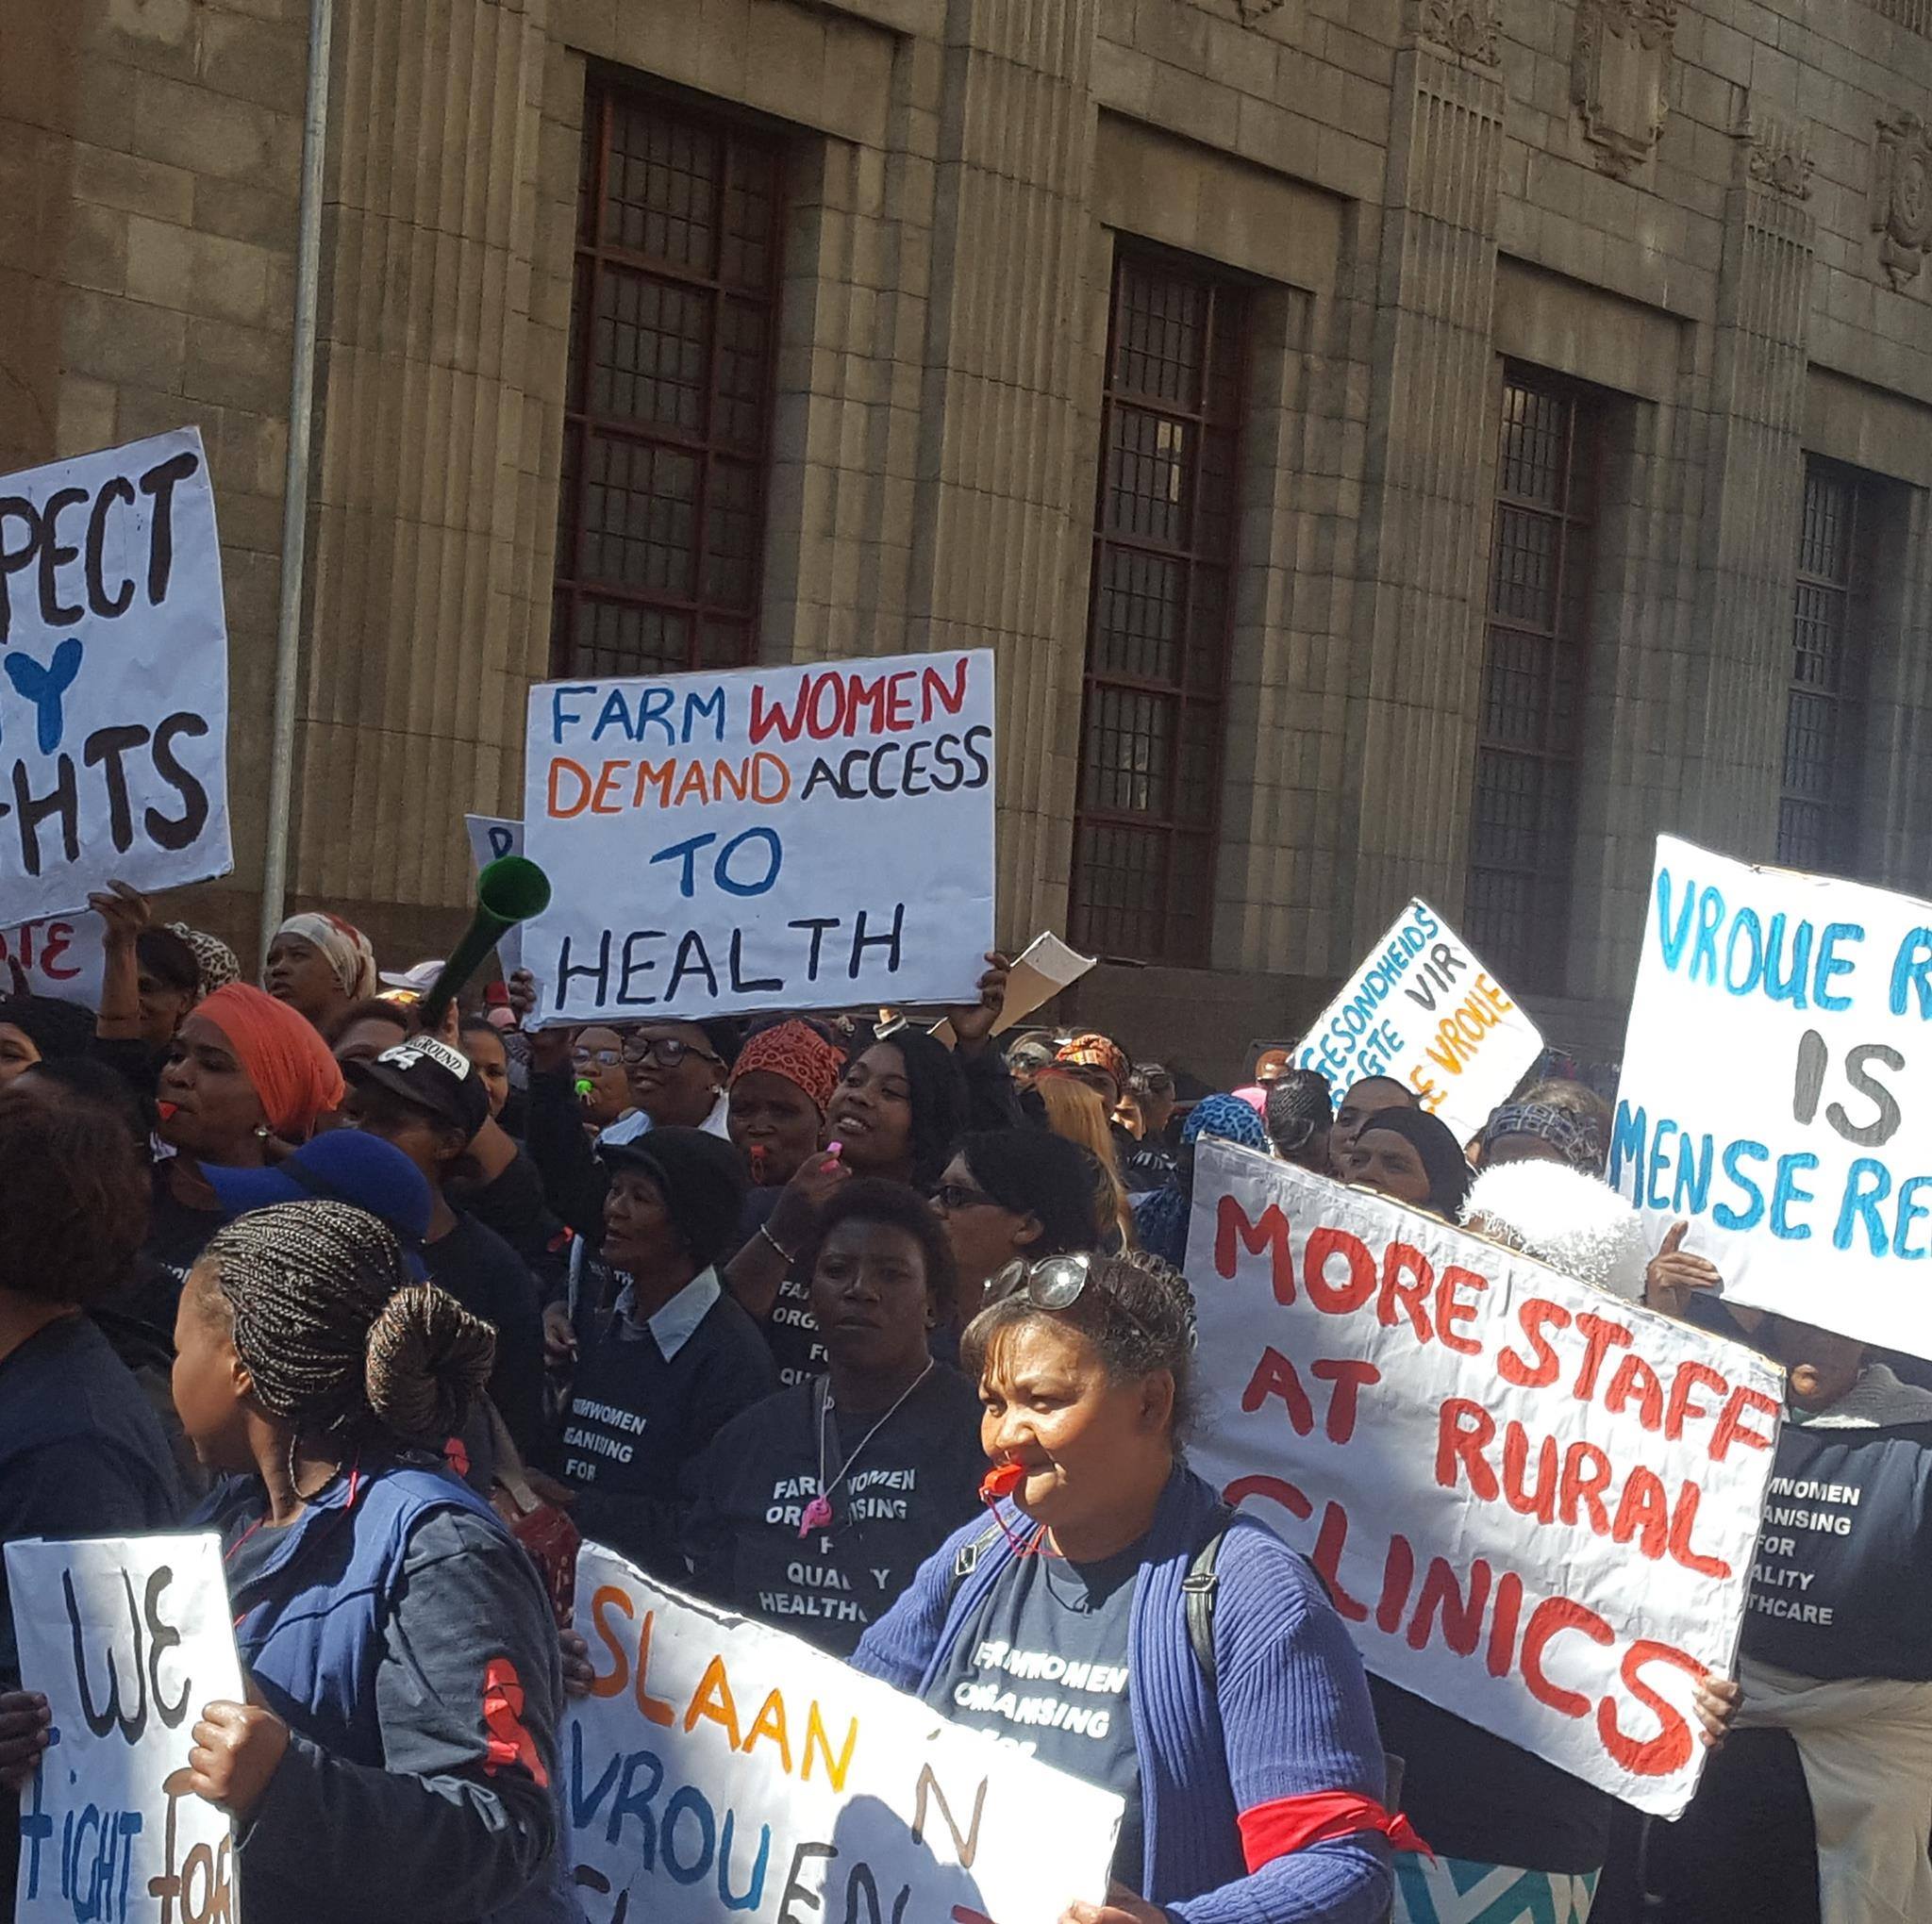 People’s Health Movement South Africa